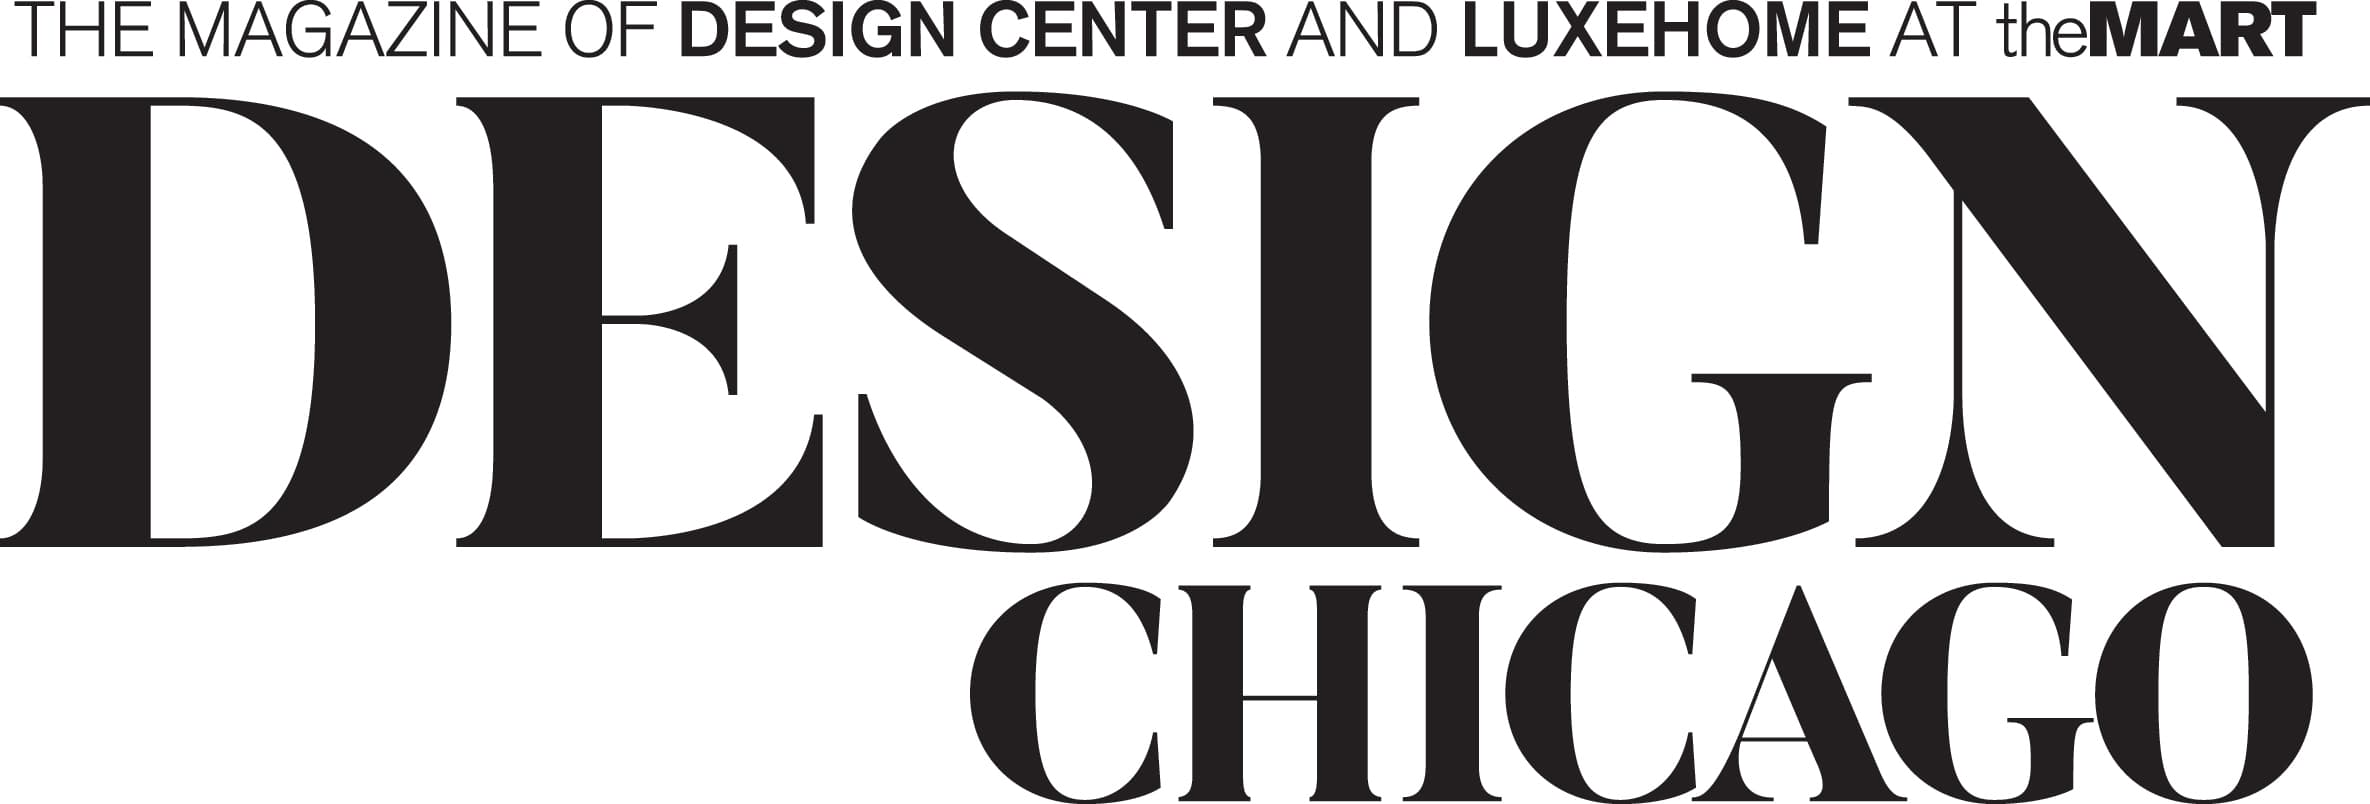 The Magazine of Design Center and LUXEHOME at THEMART Design Chicago